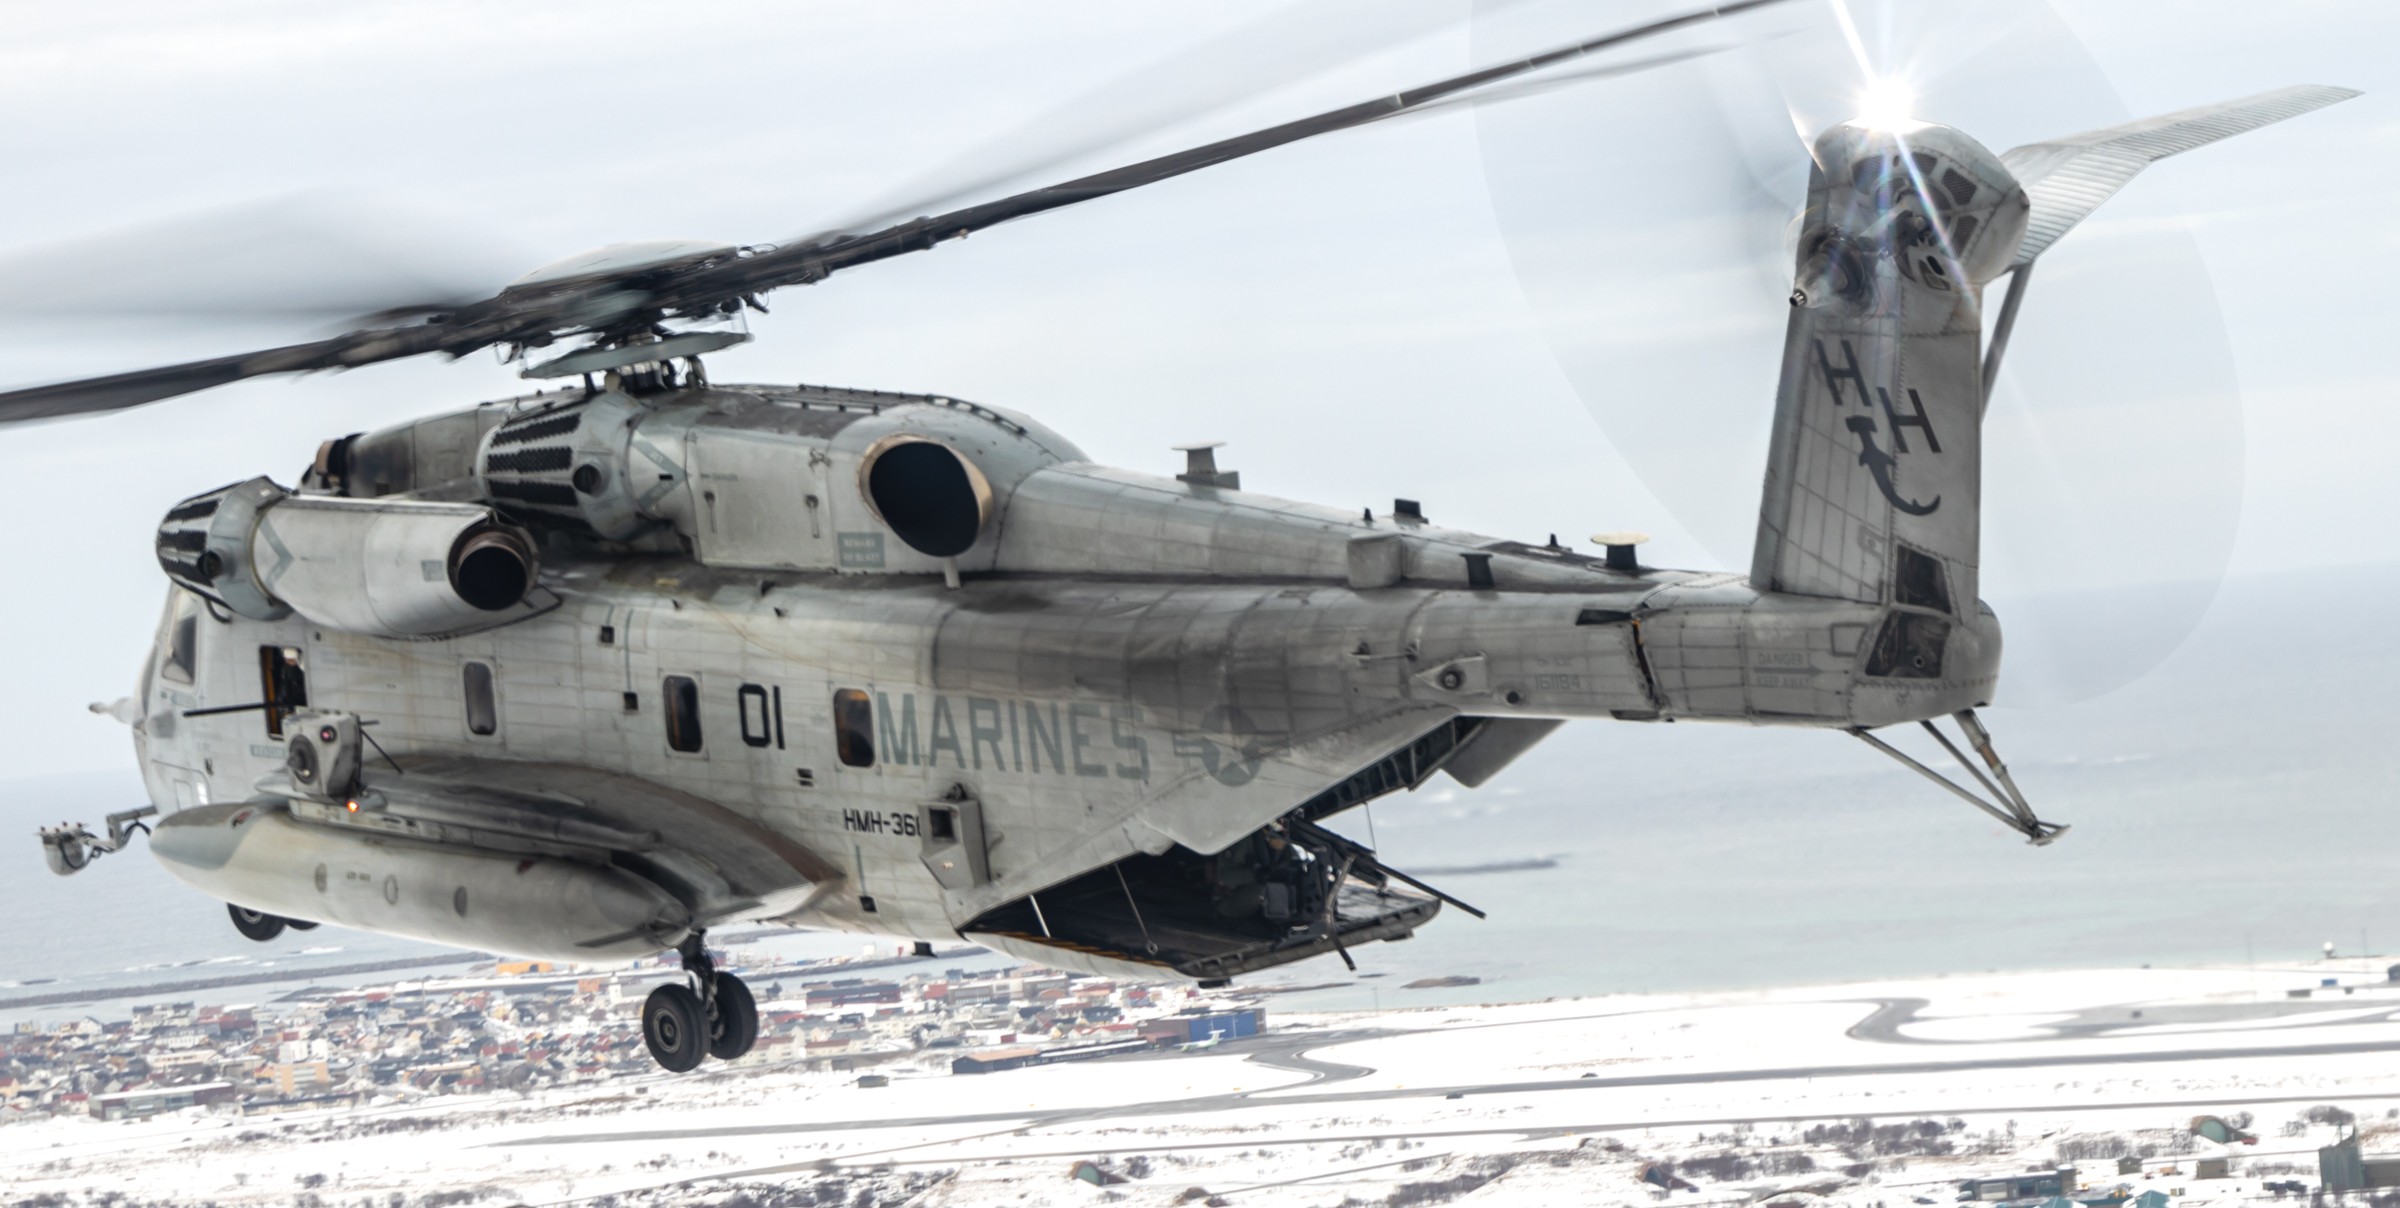 hmh-366 hammerheads ch-53e super stallion marine heavy helicopter squadron nato exercise cold response norway 159